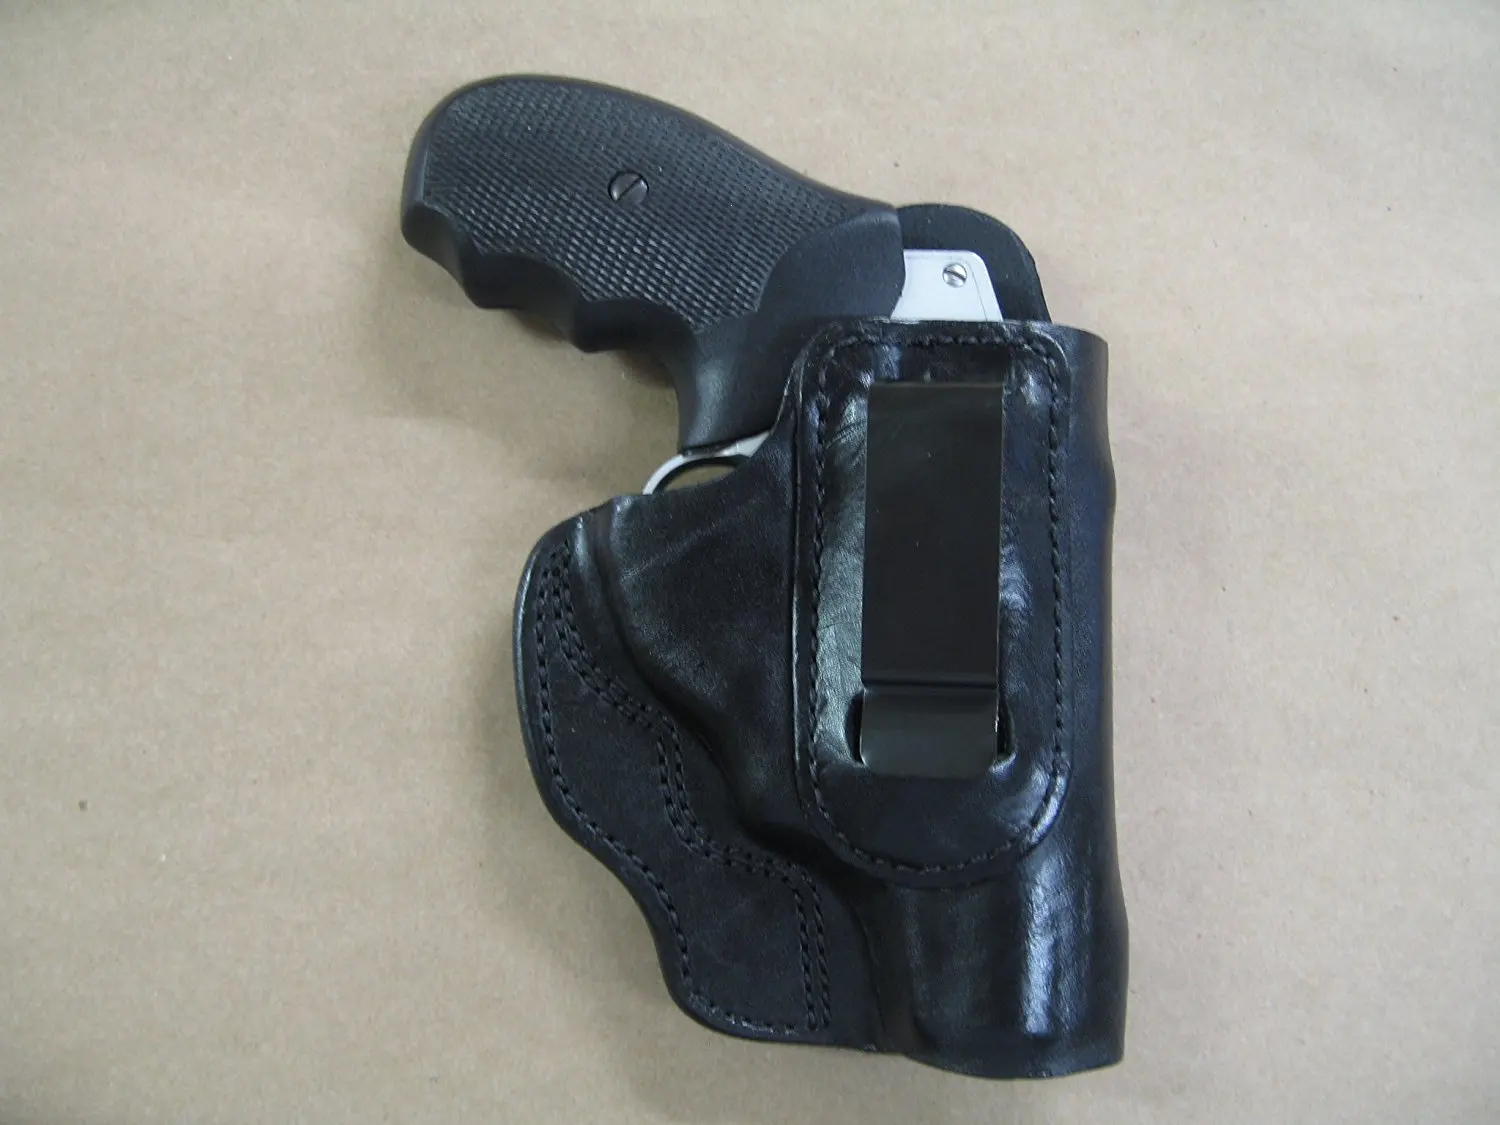 39.95. Taurus Protector Polymer 85, 605 Poly Revolver In The Waistband IWB Conceal...